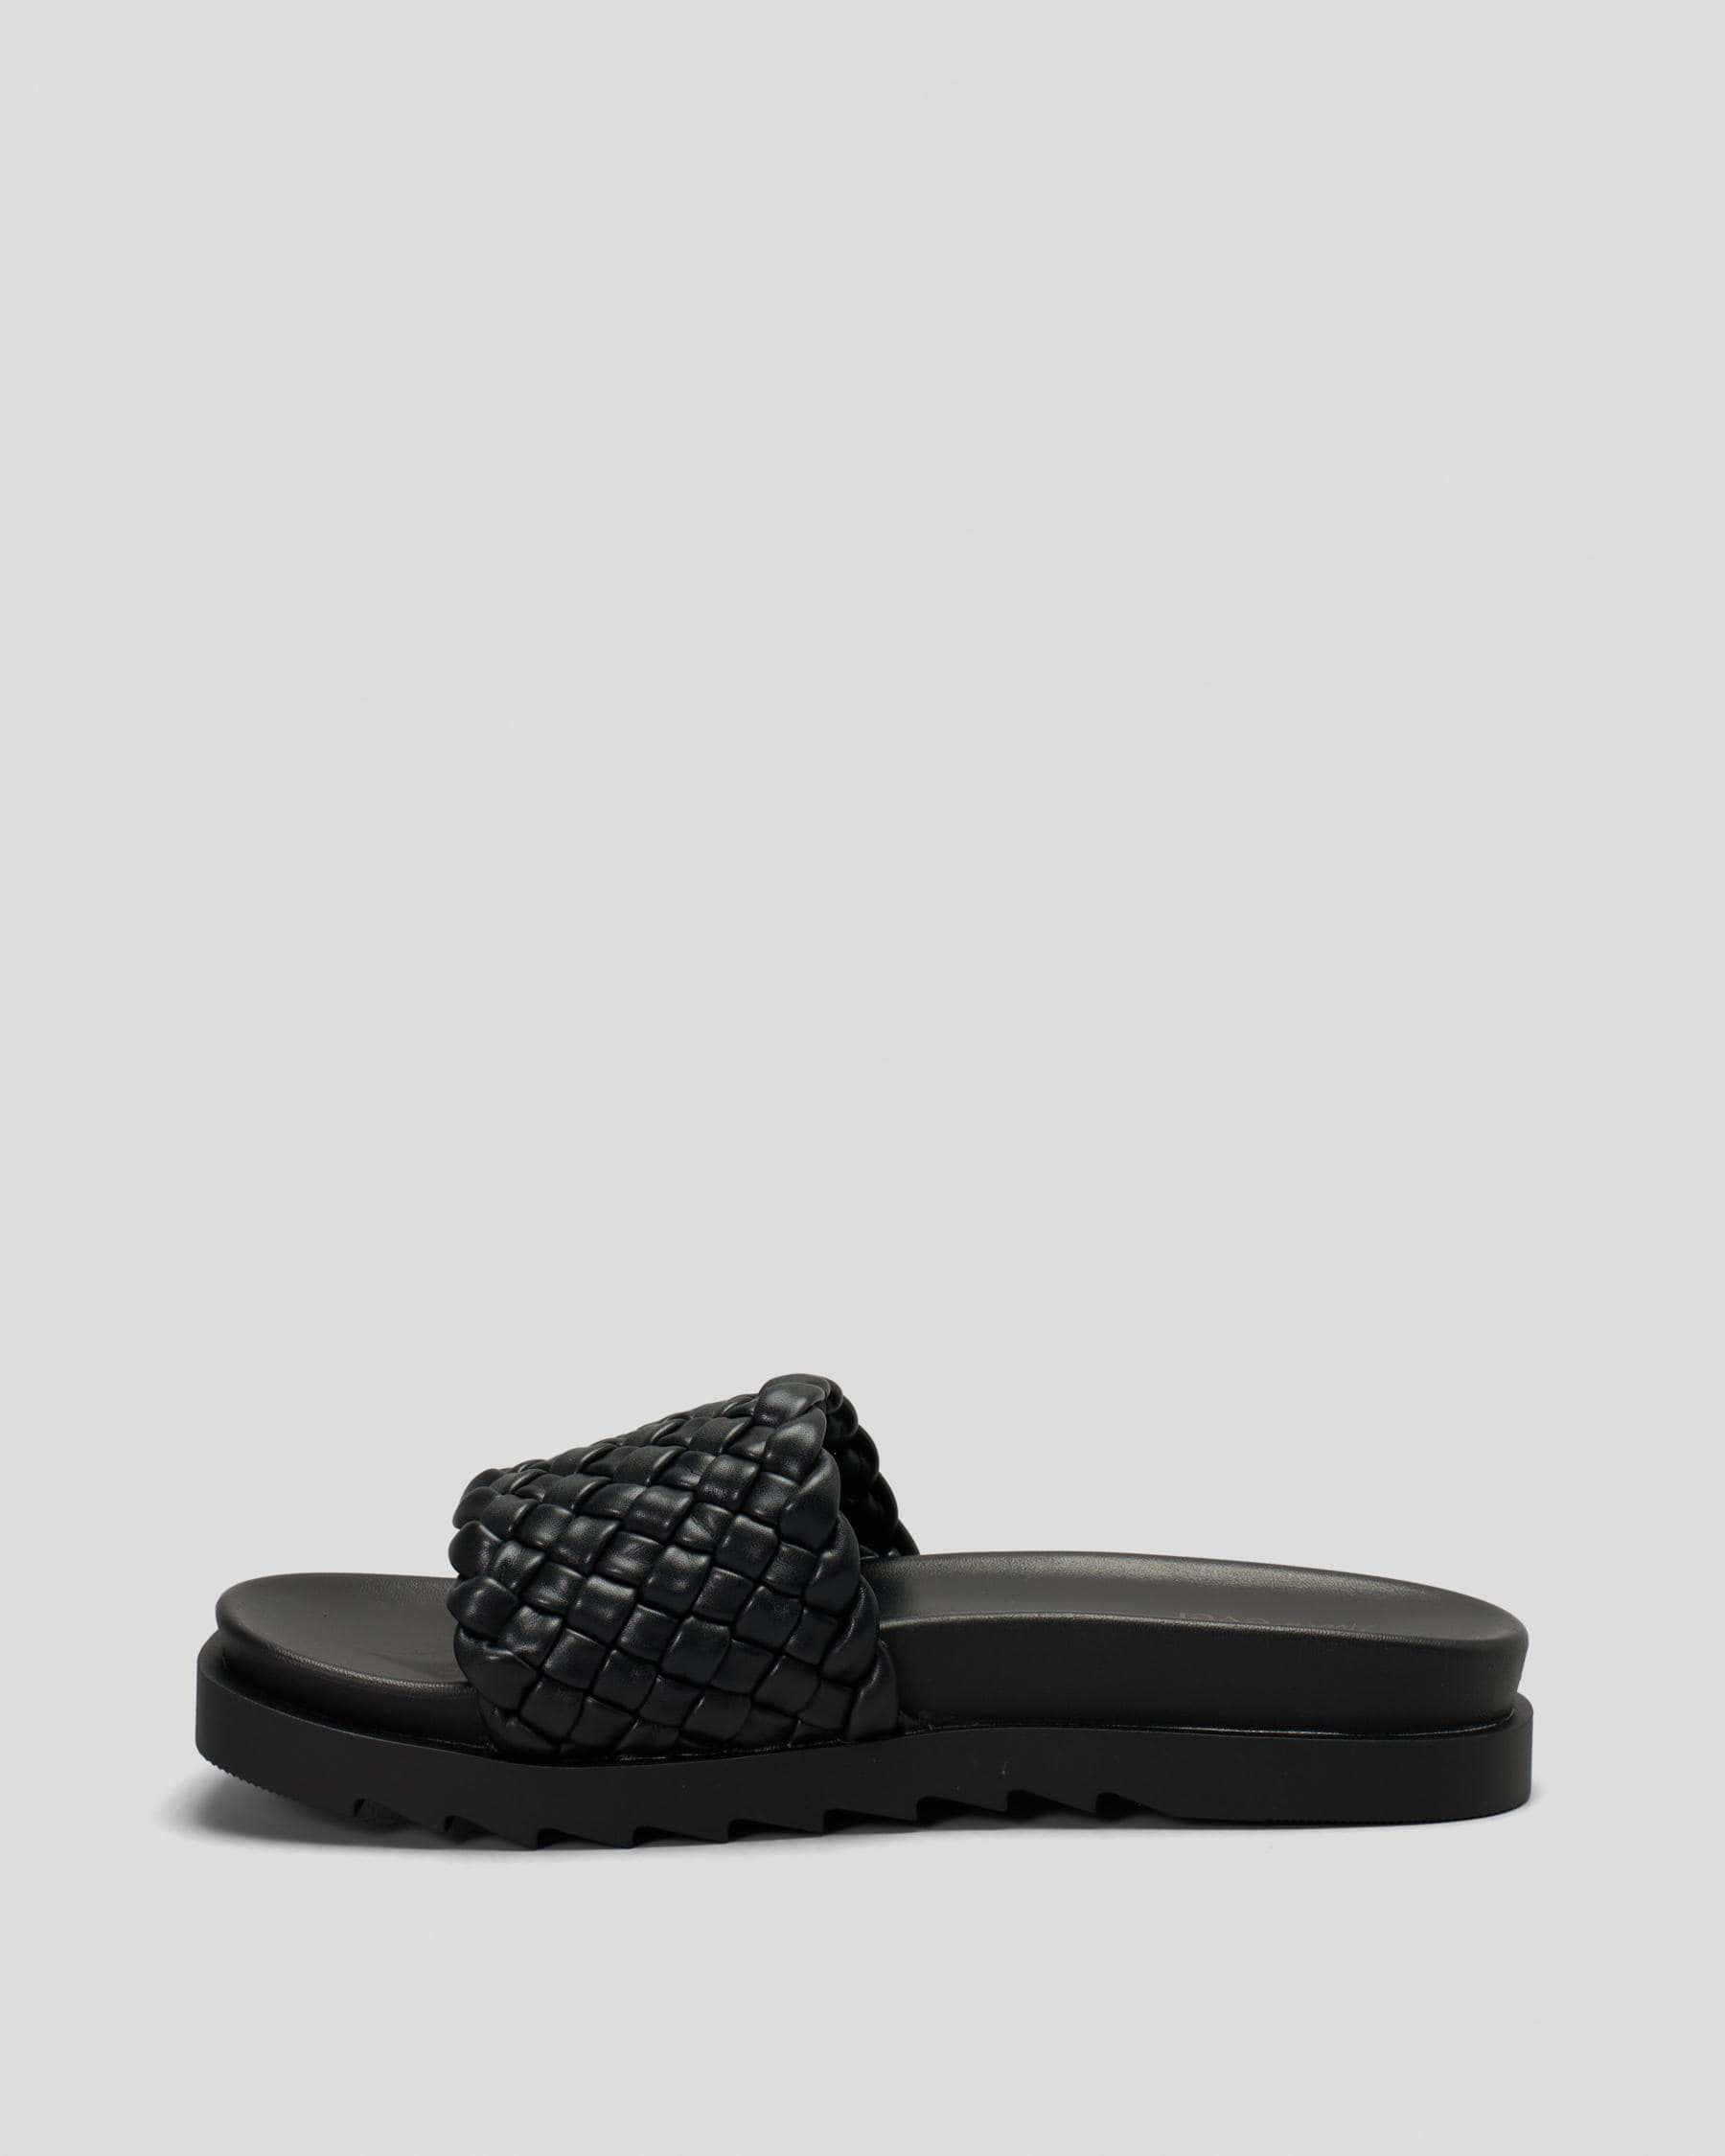 Ava And Ever Maisie Slide Sandals In Black - Fast Shipping & Easy ...